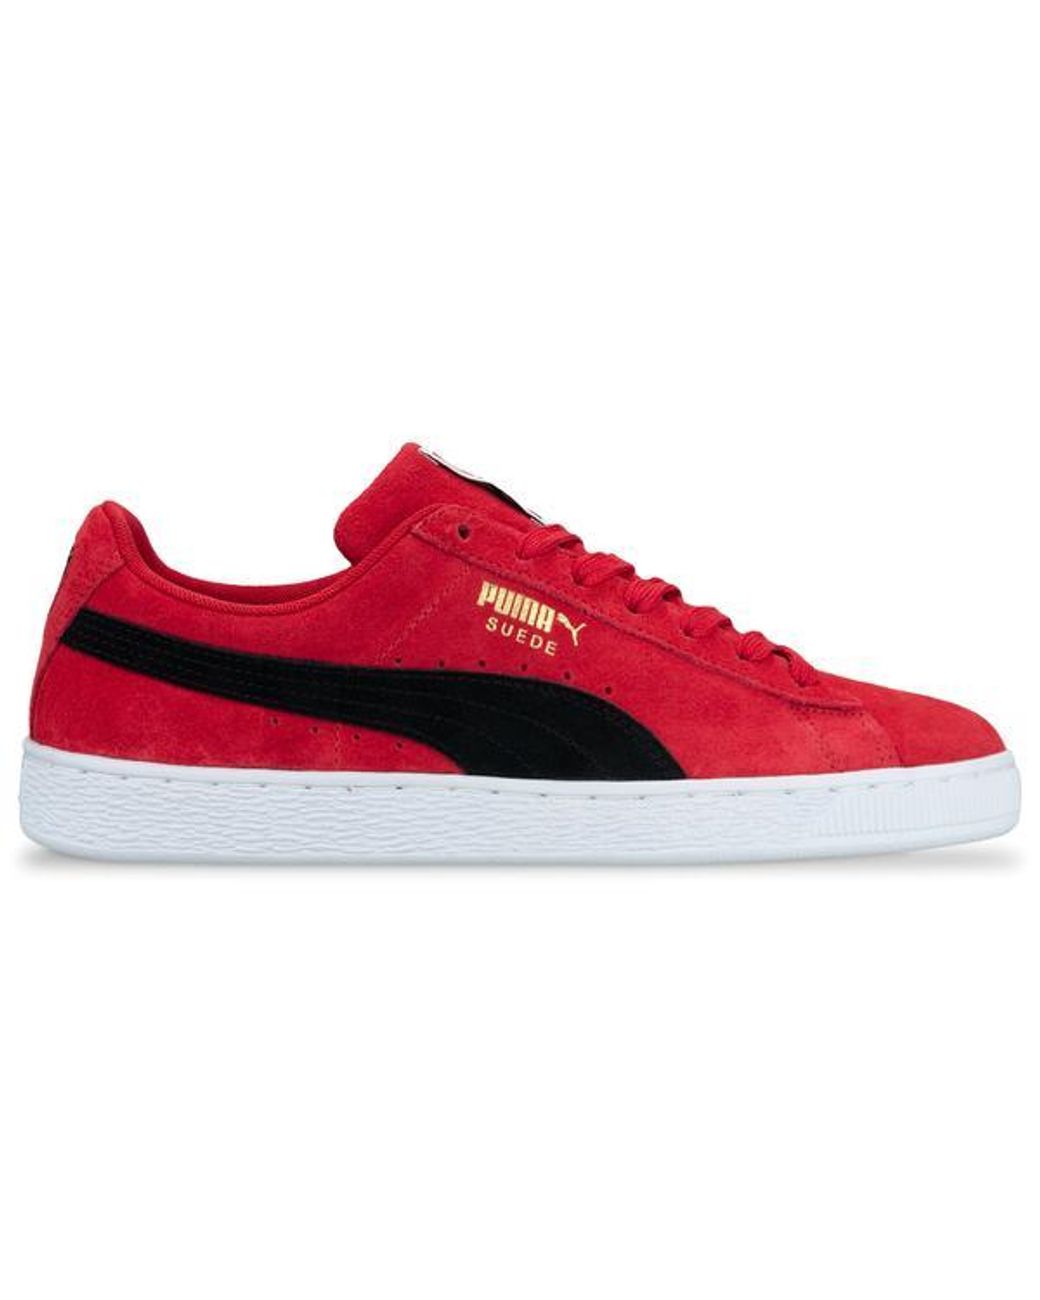 PUMA Suede Classic Trainers Ribbon Red Black for Men | Lyst